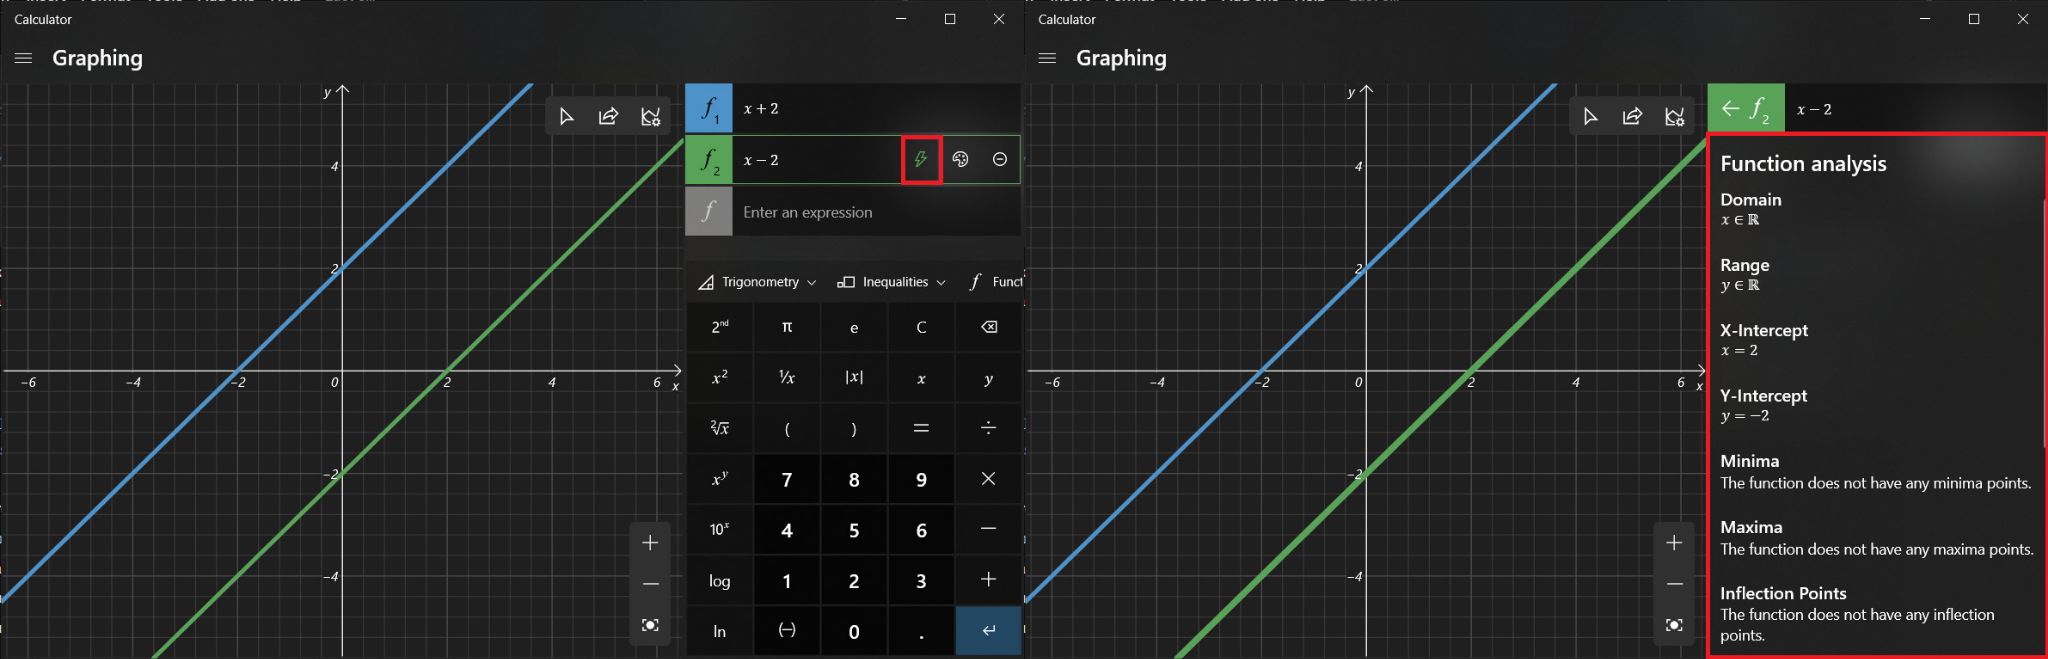 Apart from plotting equations, the graphing mode can also be used to analyze equations (although not all of them). To check the functional analysis of an equation, click on the lightning icon next to it.